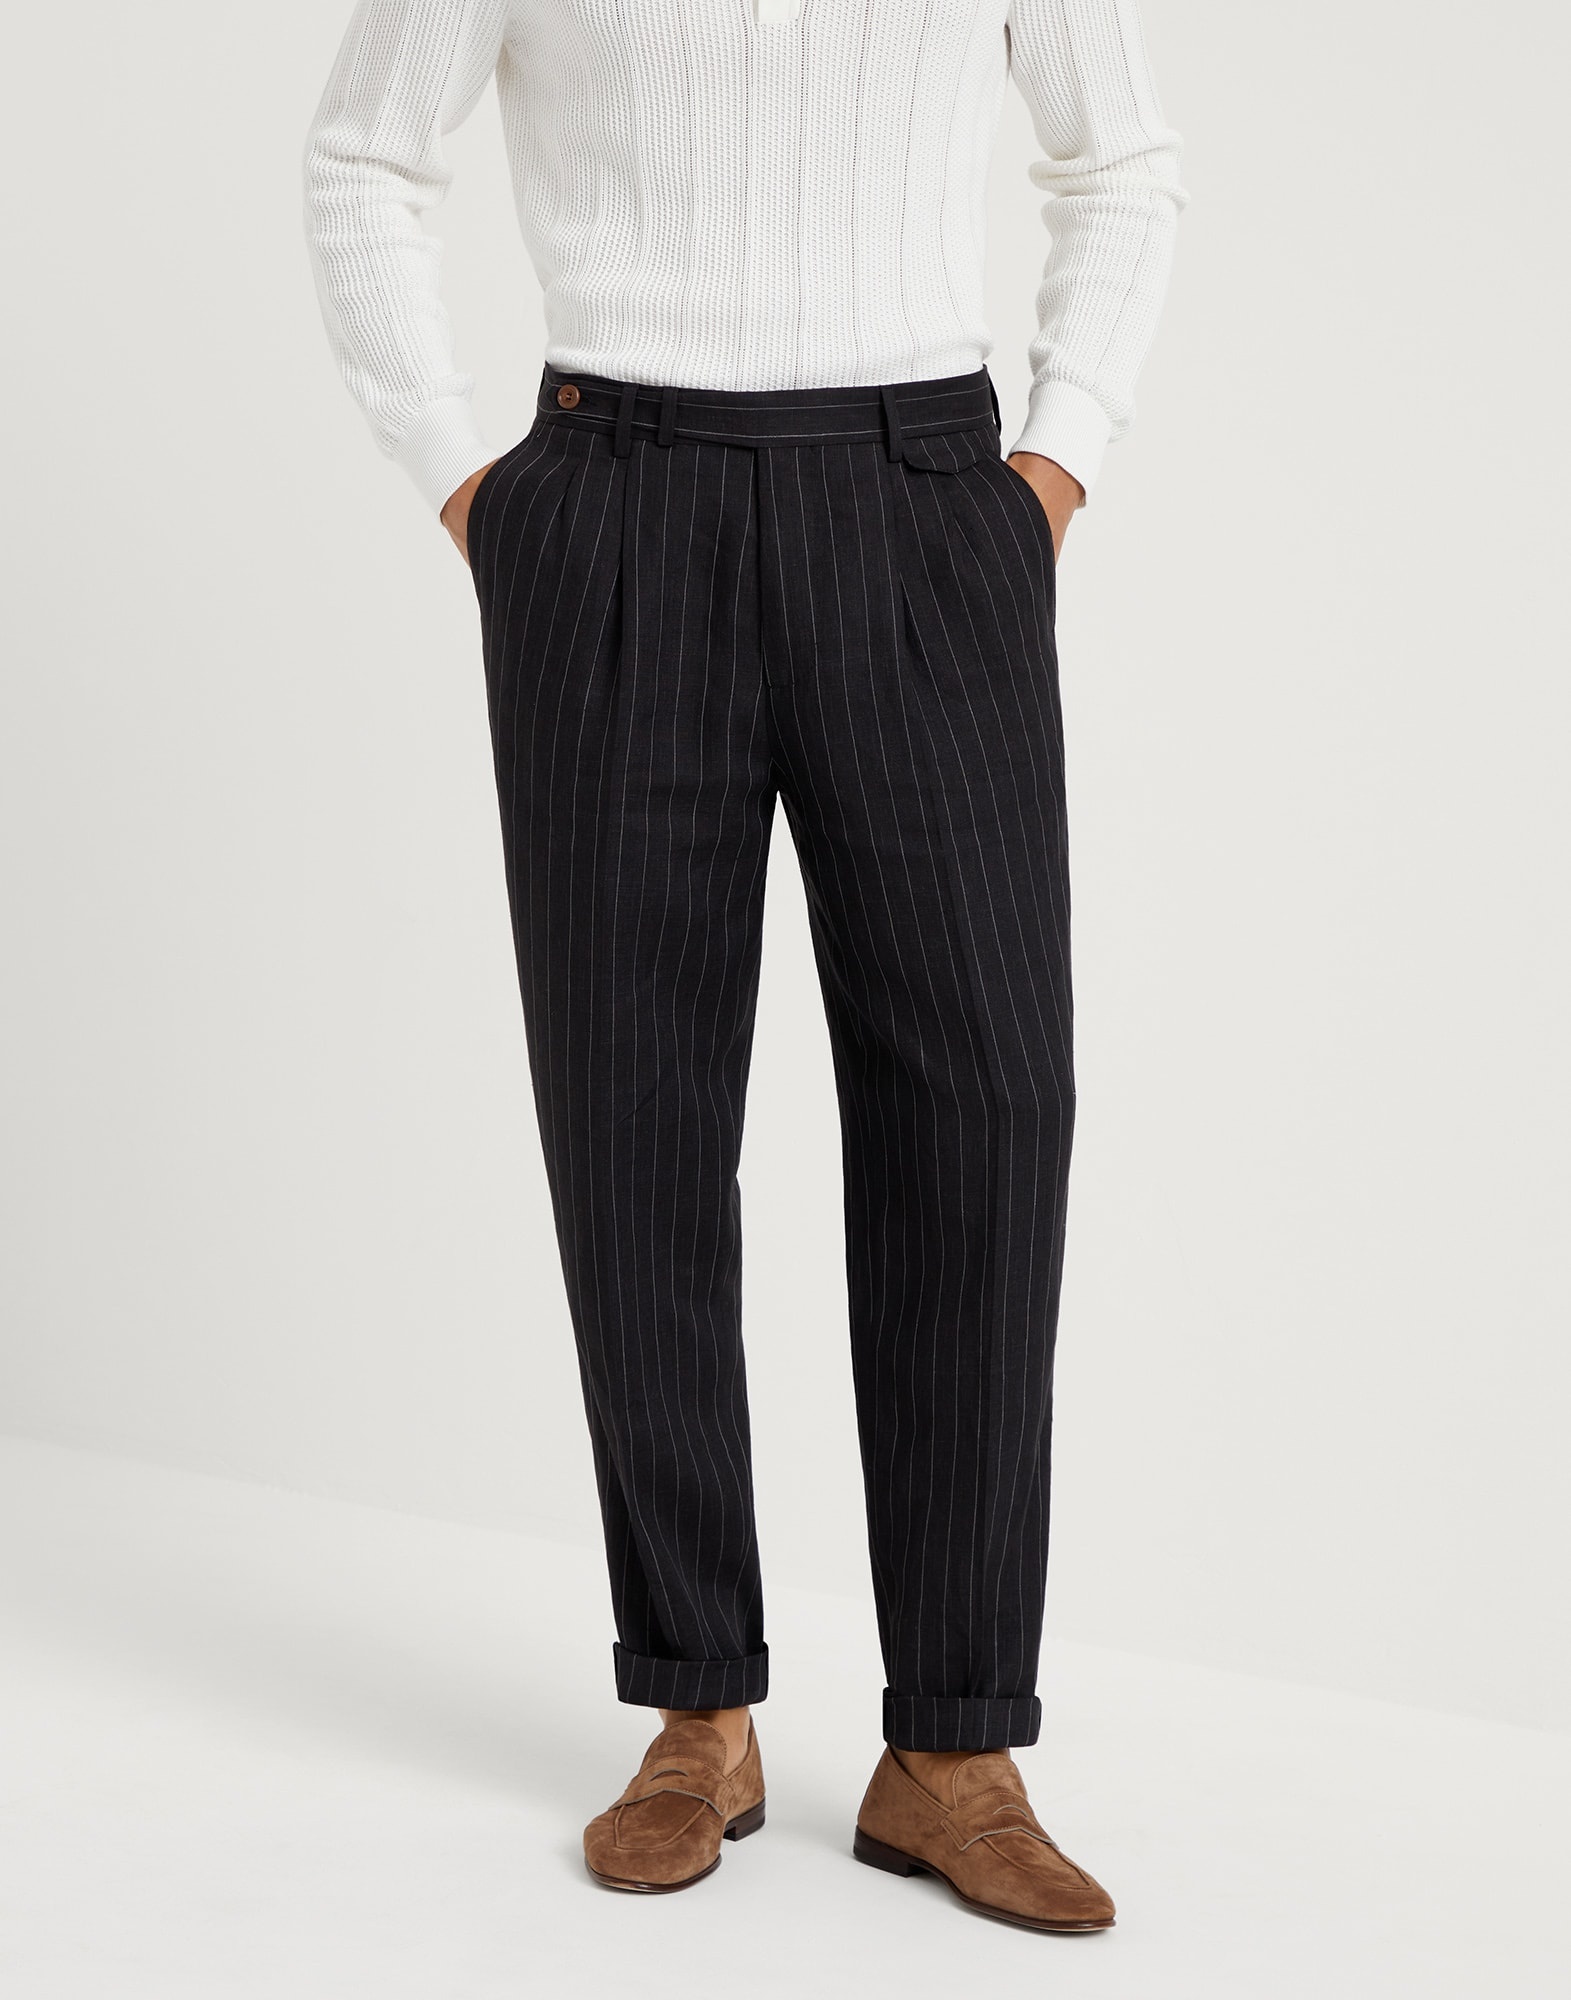 Linen chalk stripe leisure fit trousers with double pleats and tabbed waistband - 1